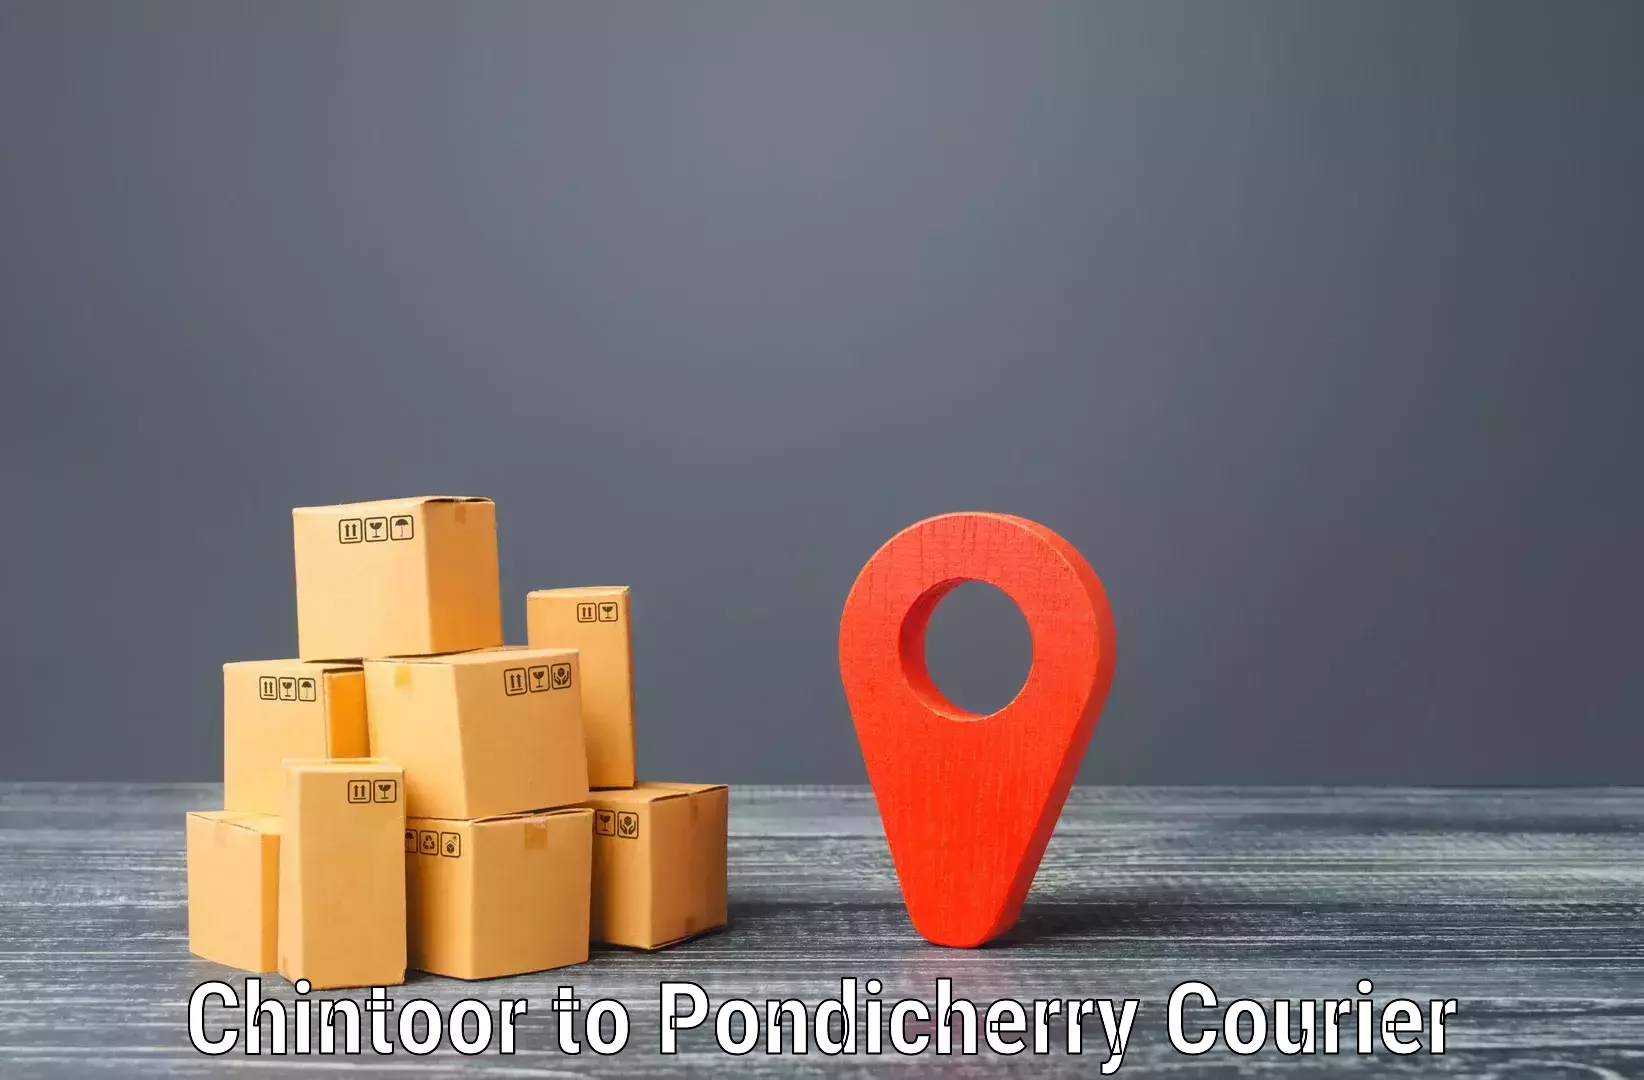 Courier service innovation Chintoor to Pondicherry University